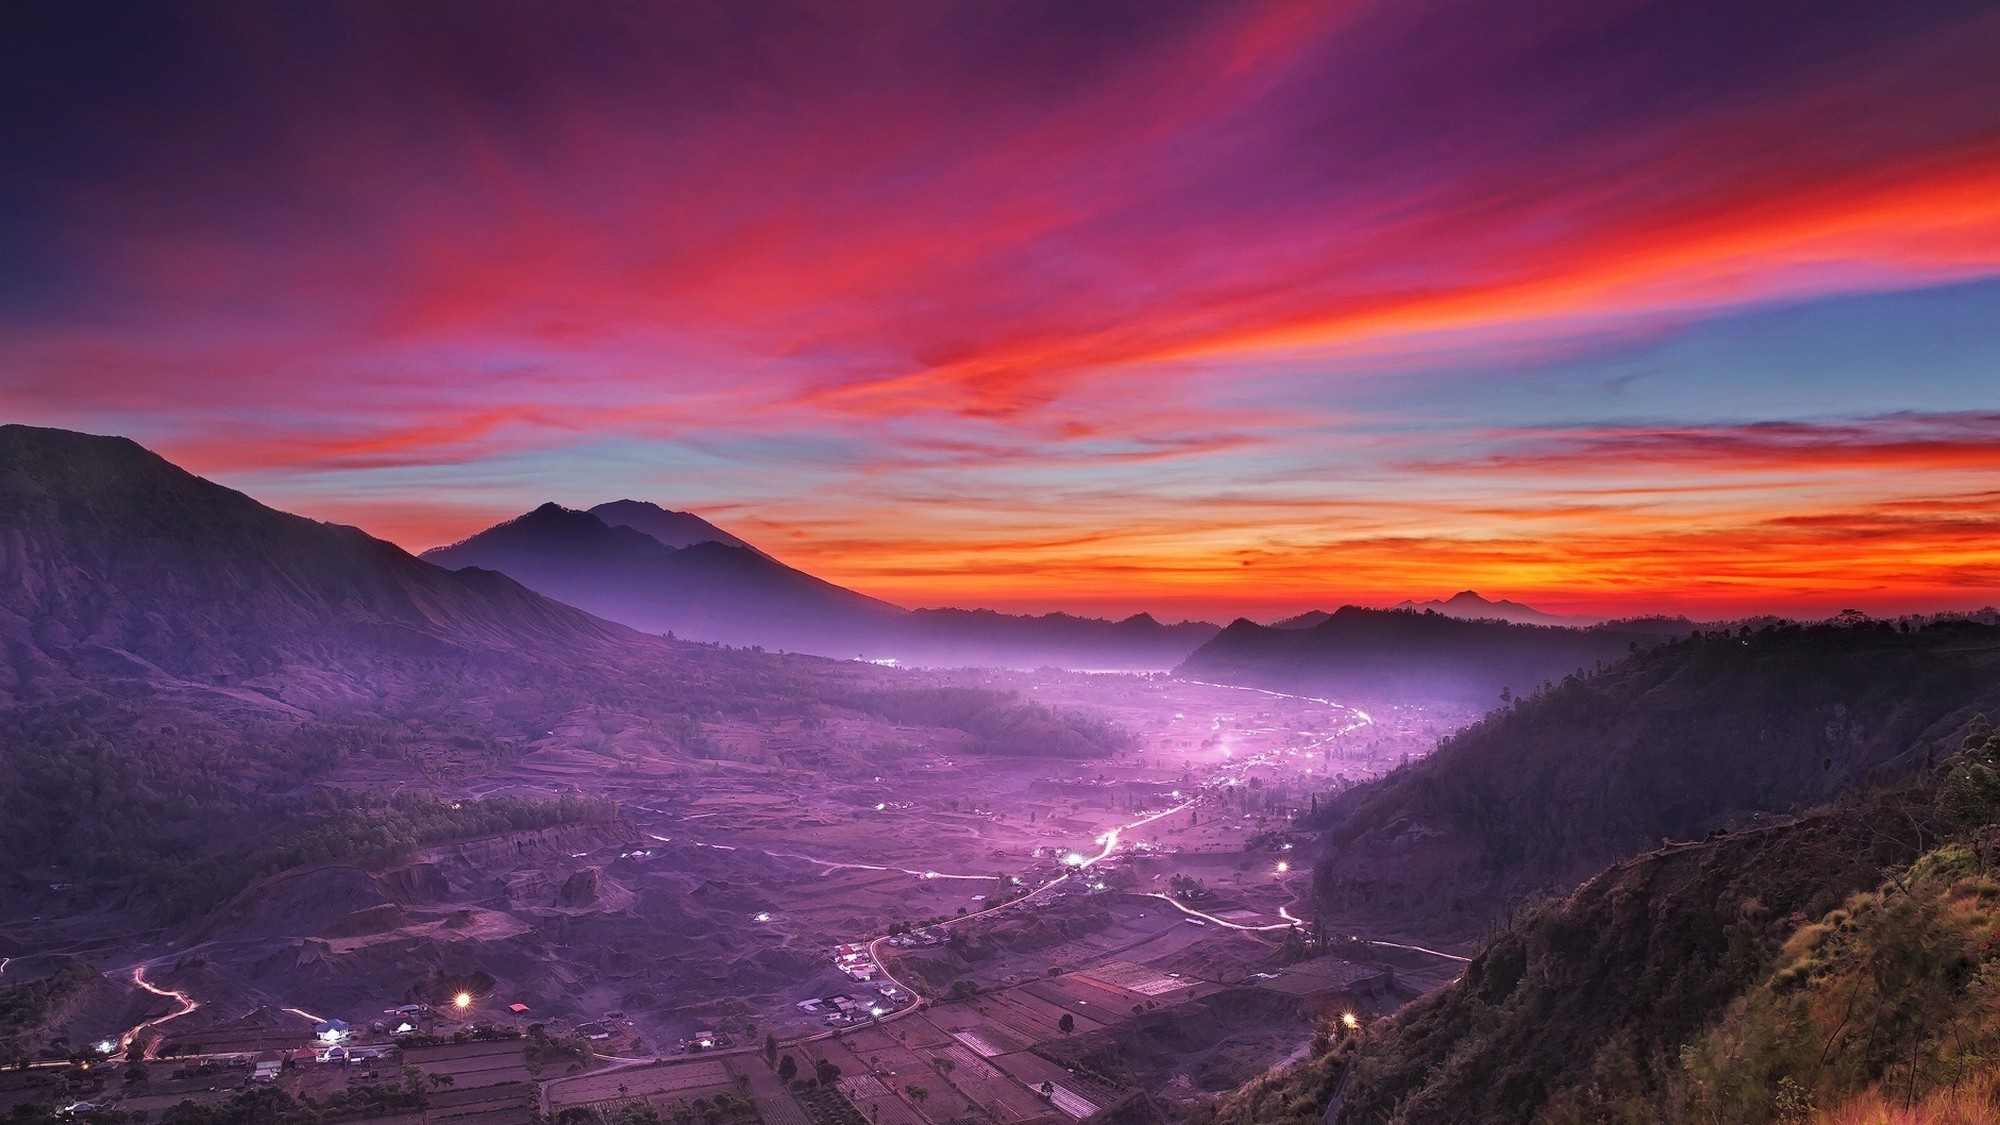 Landscape Nature Sunset Mist Valley Mountain Pink Clouds